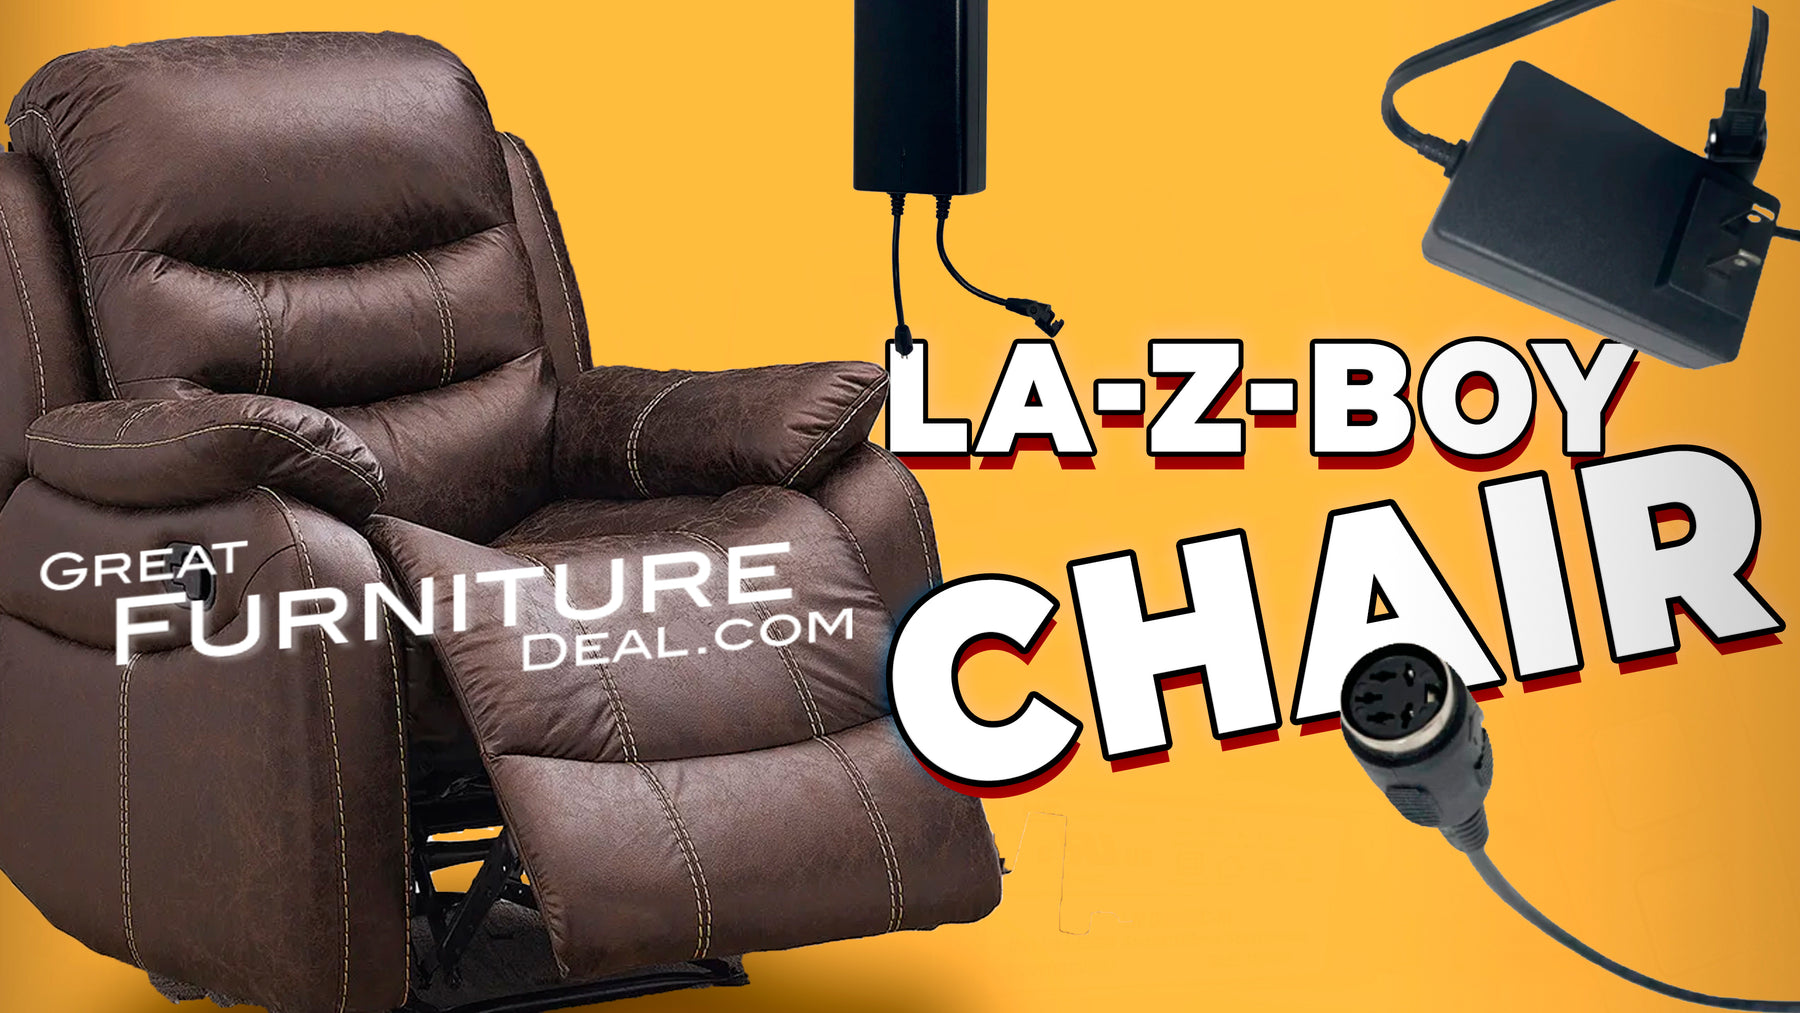 How do I know what La-Z-Boy Parts I need to connect my power recliner?